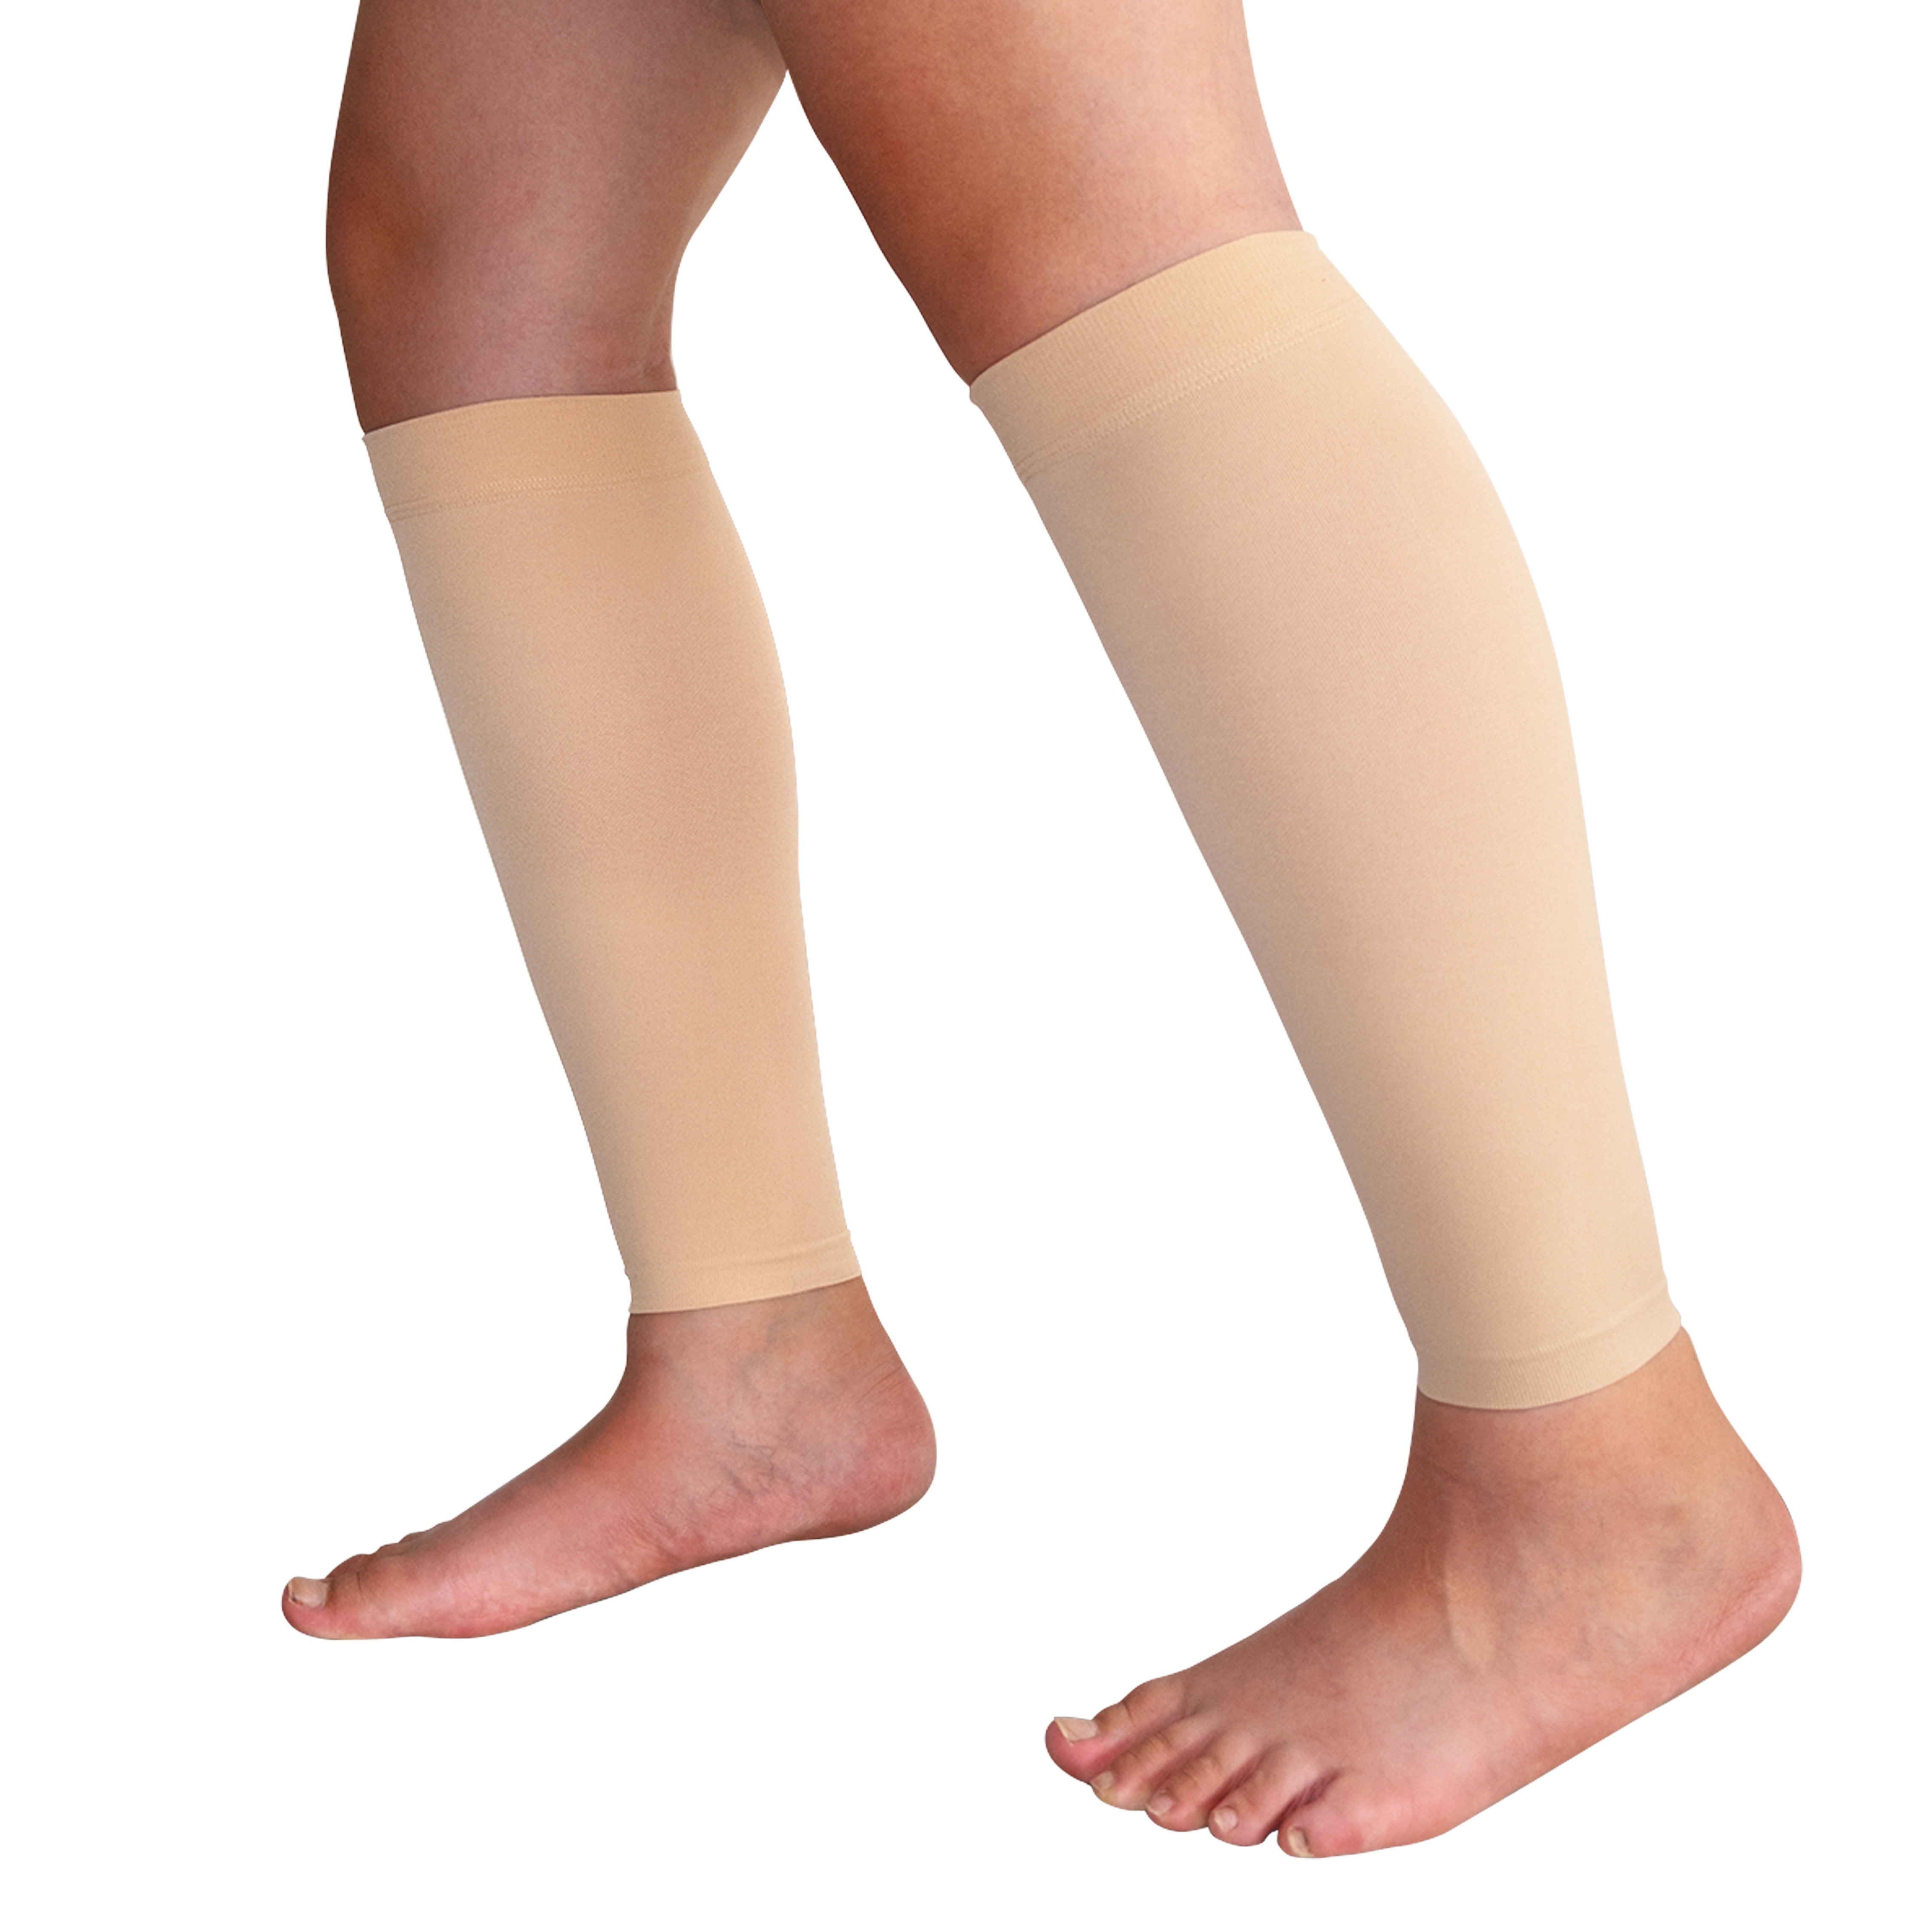 Calf Compression Sleeves - Footless Compression Socks for Women